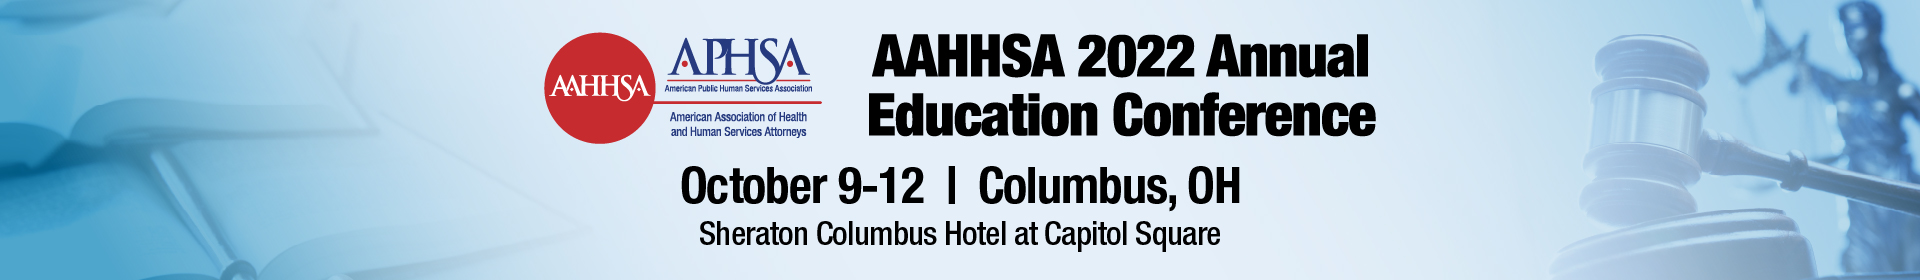 AAHHSA 2022 Annual Education Conference Event Banner